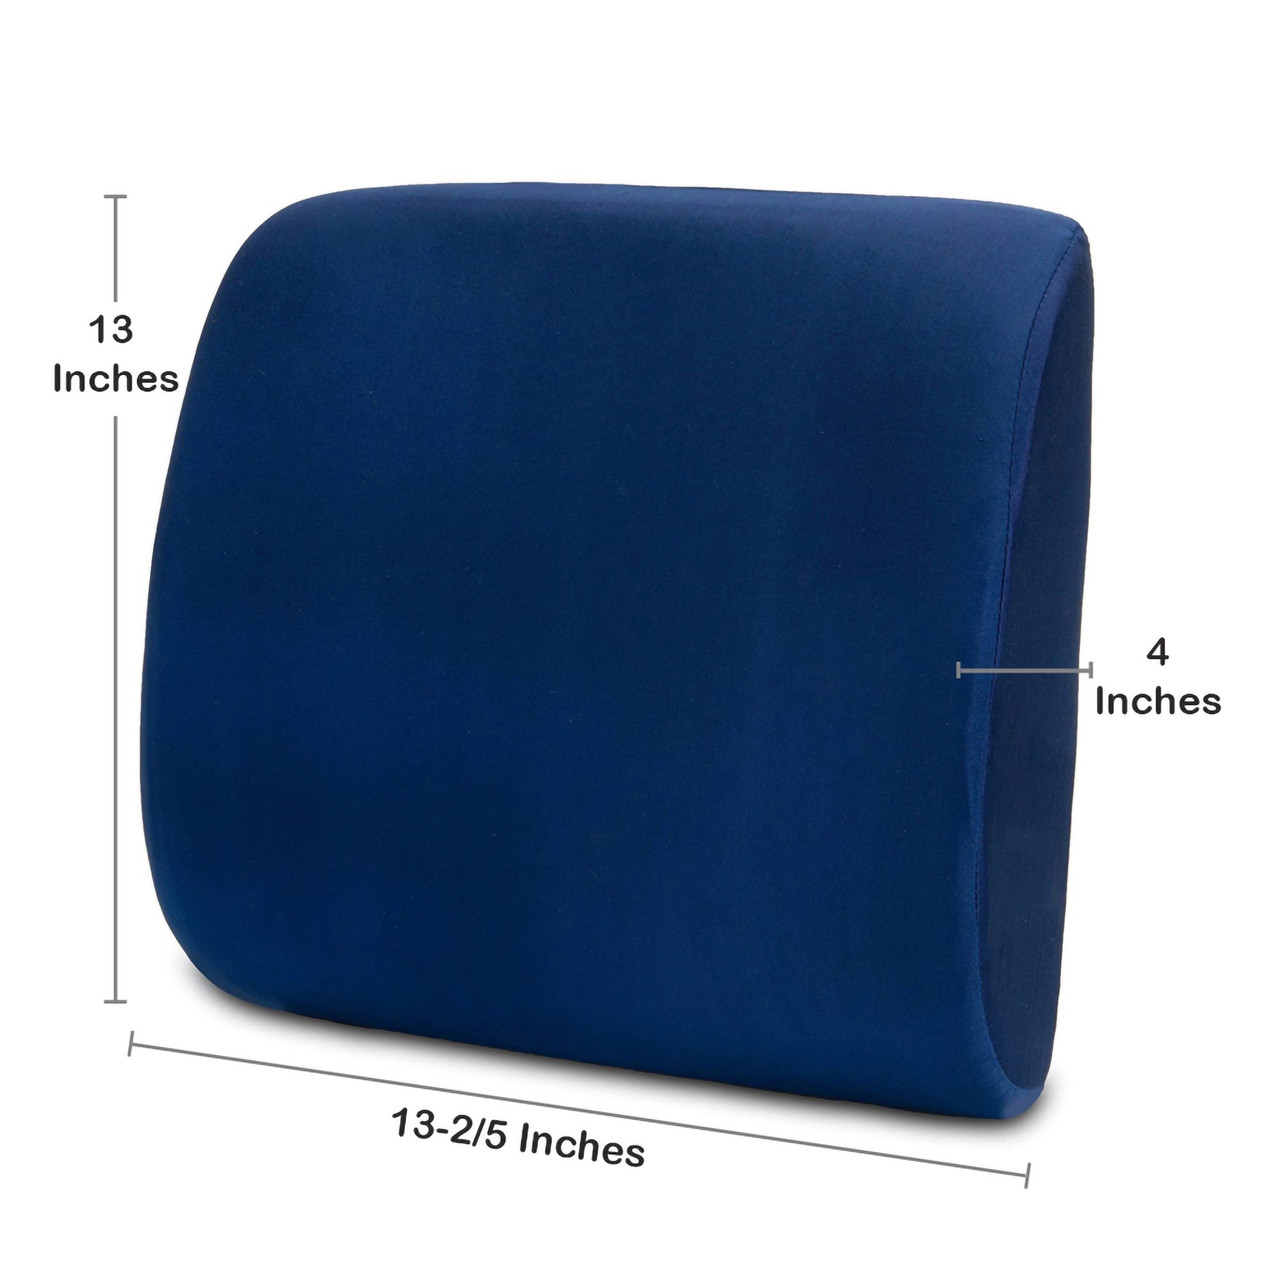 McKesson Foam Coccyx Support Seat Cushion For Wheelchair Seats 4